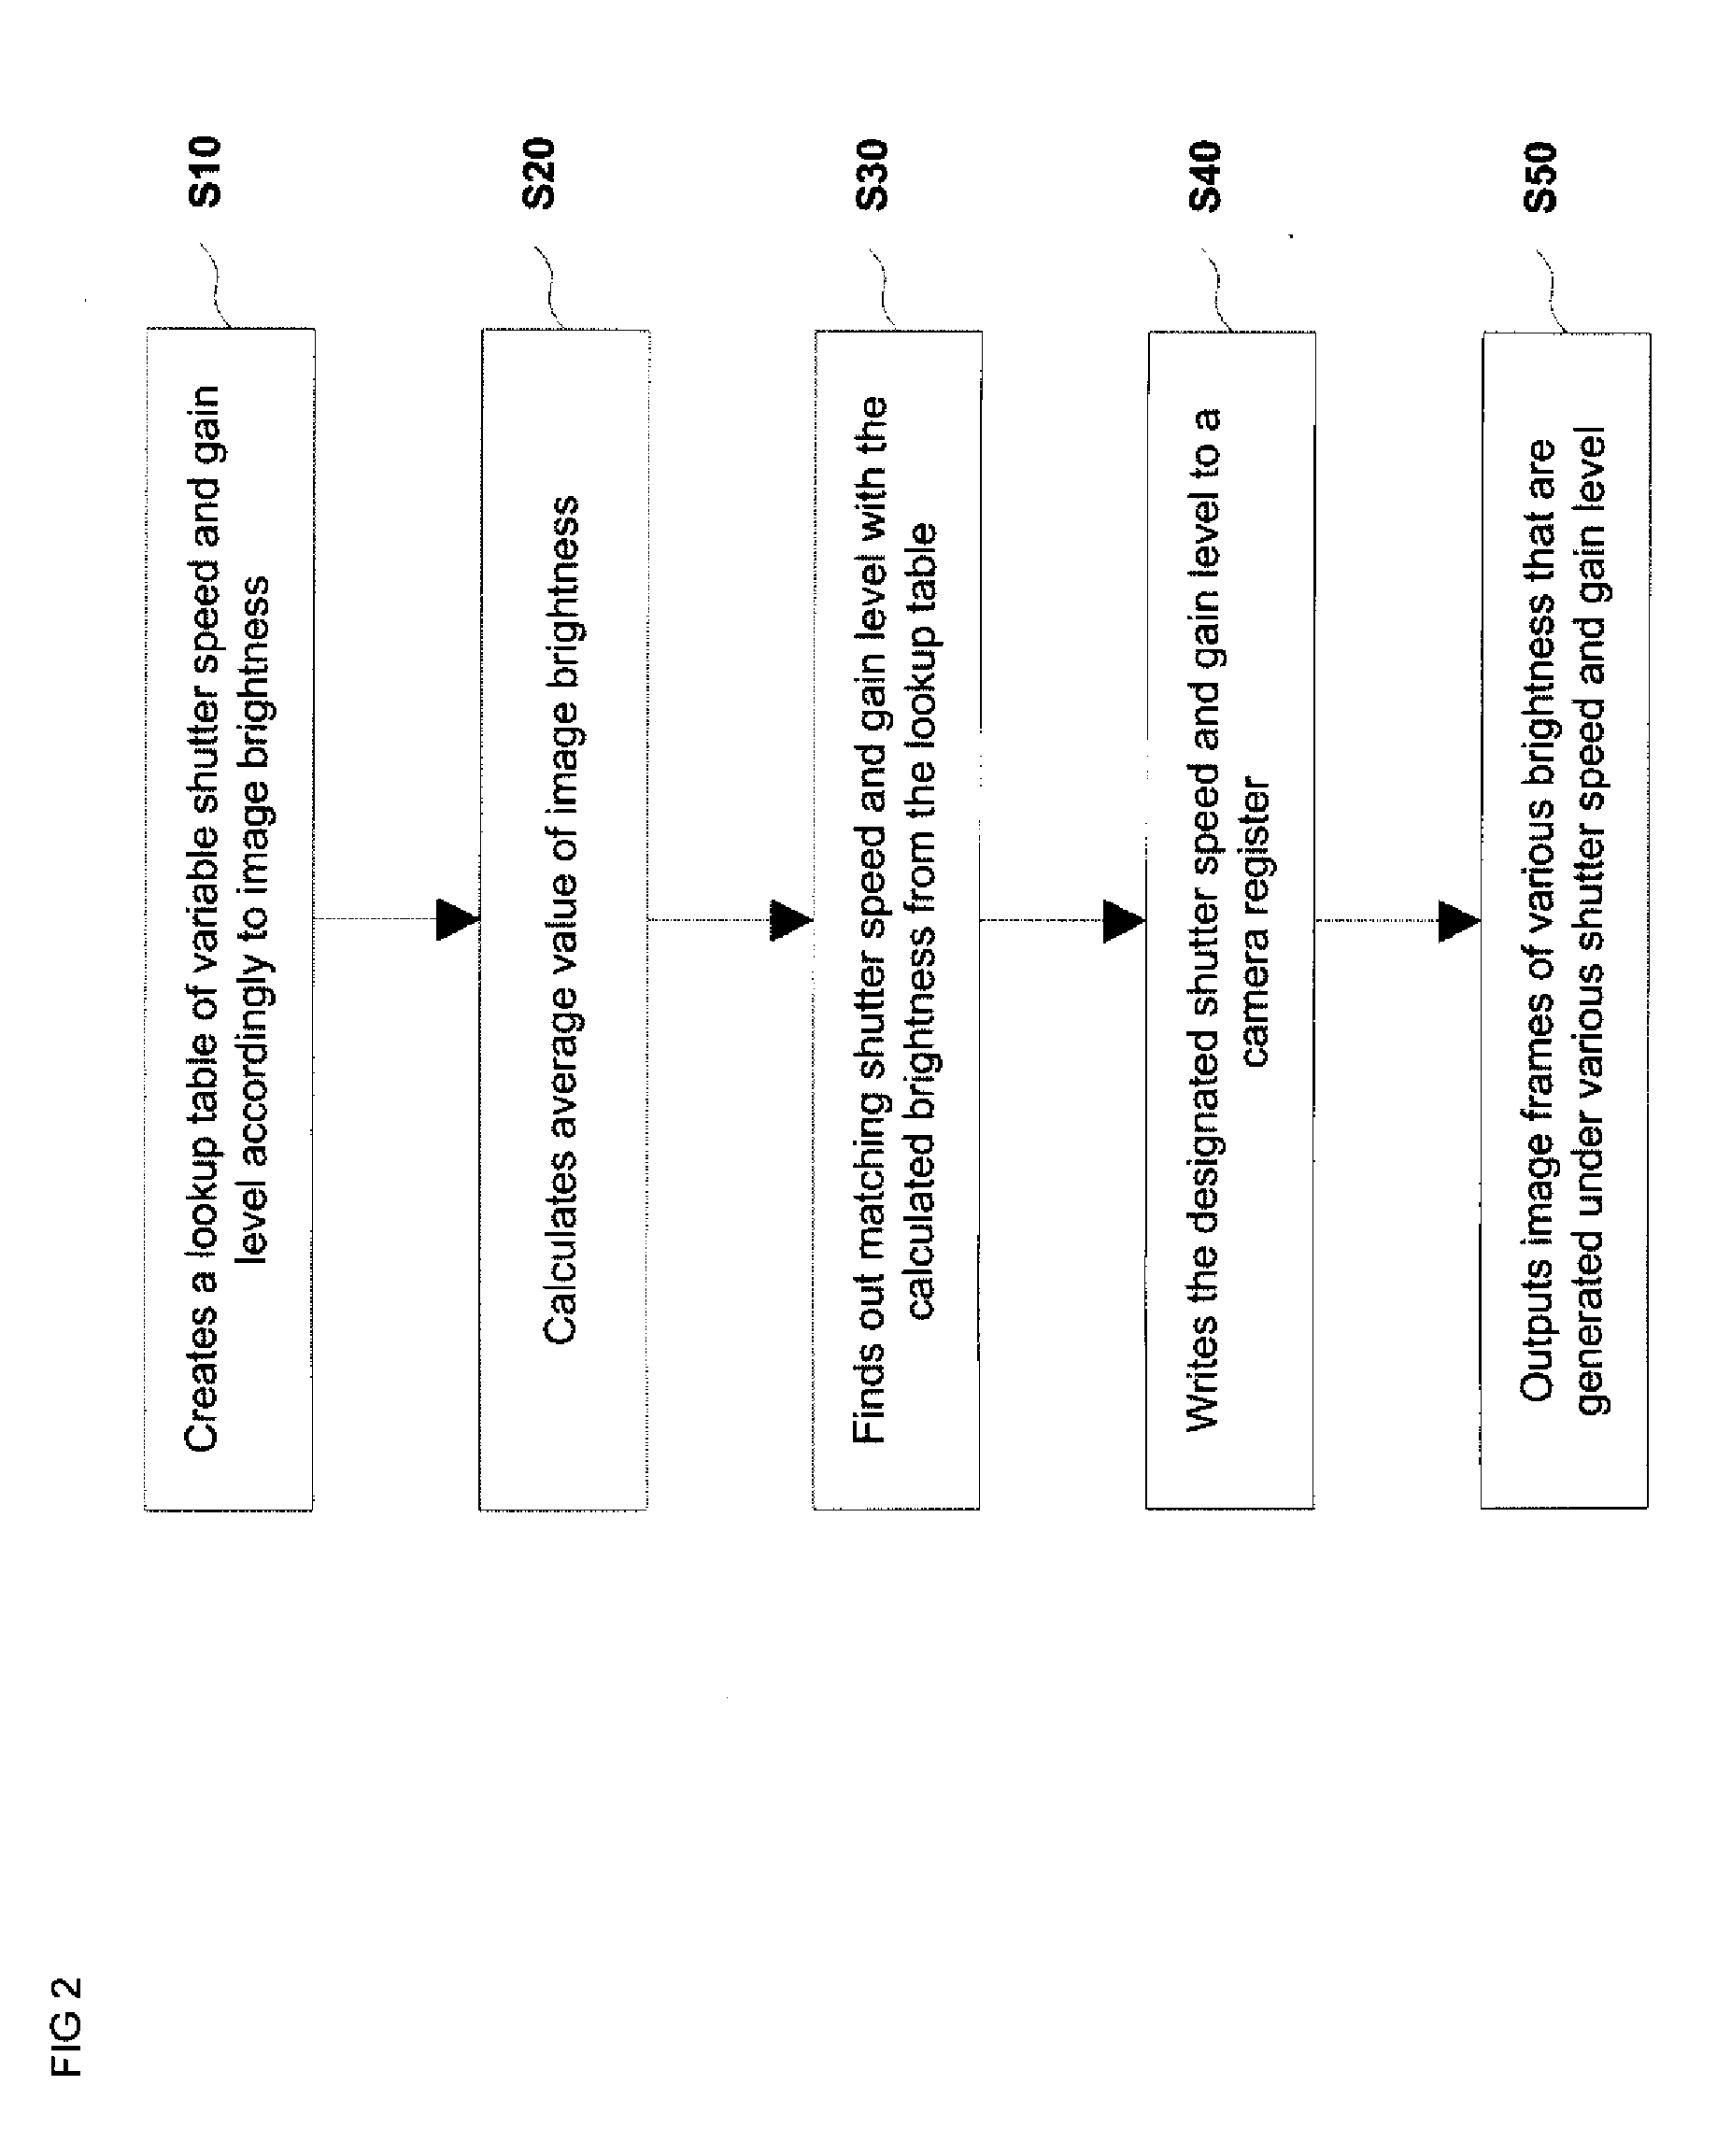 Camera control method for vehicle number plate recognition